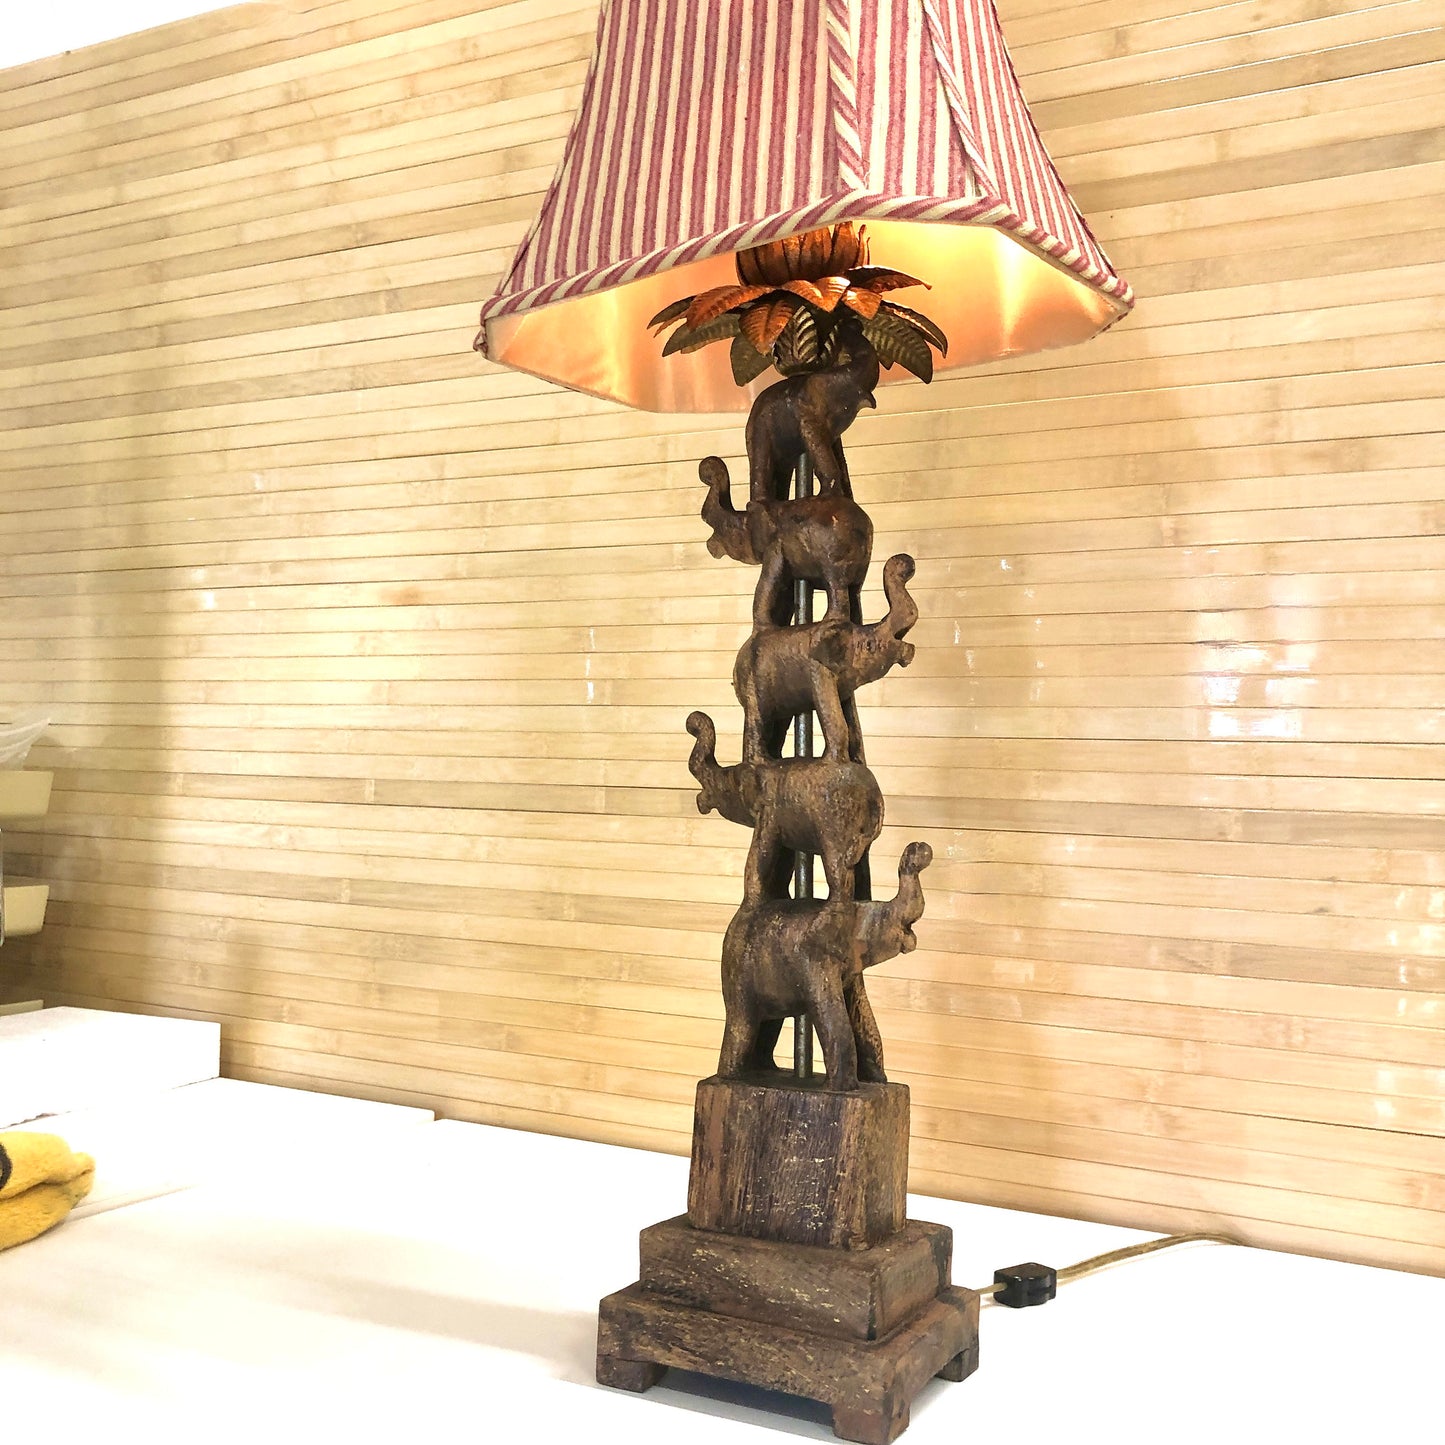 Stacked Elephants Table Lamp by Tyndale